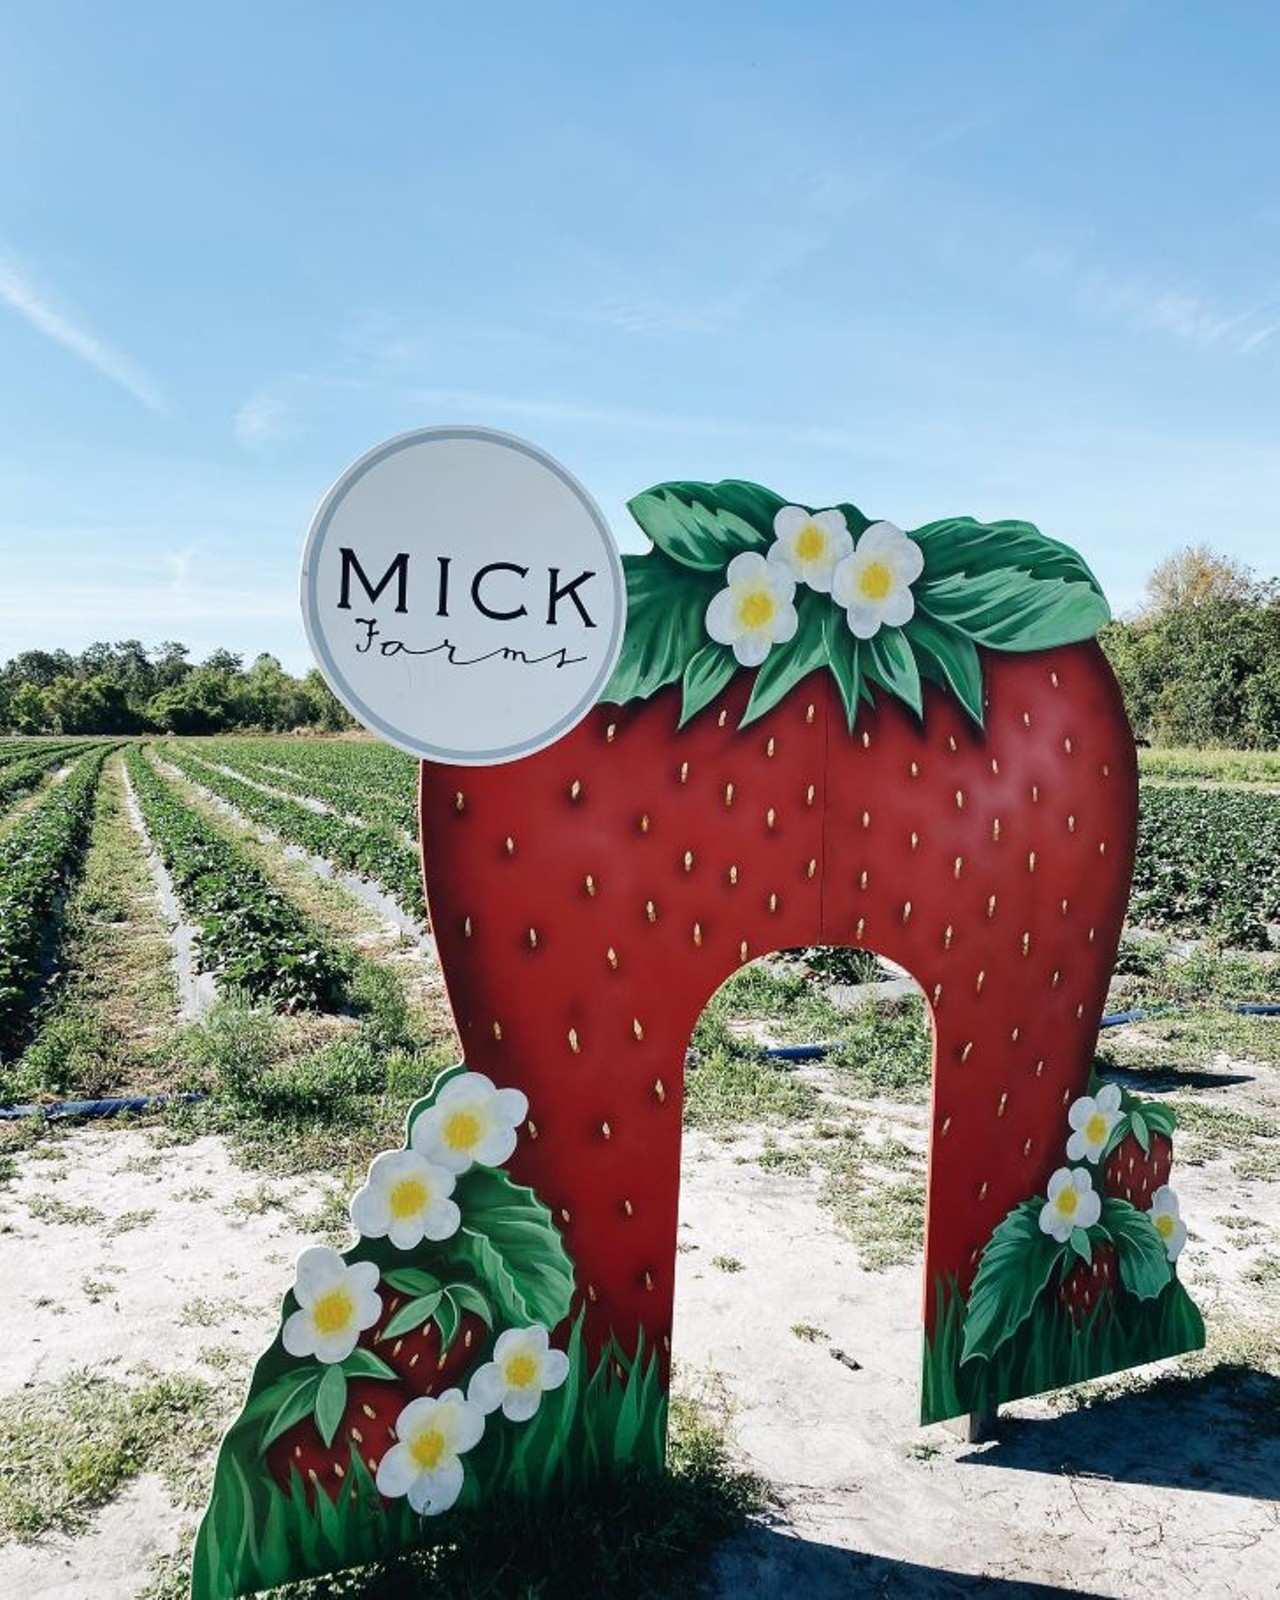 Mick Farms 
4261 Canoe Creek Road, Saint Cloud
Mick&#146;s is full of fresh food to bring home, but their charming U-Pick strawberry field is an ideal family-friendly outing. Check out their website and Facebook for their hours.
Photo via Mick Farms/Facebook